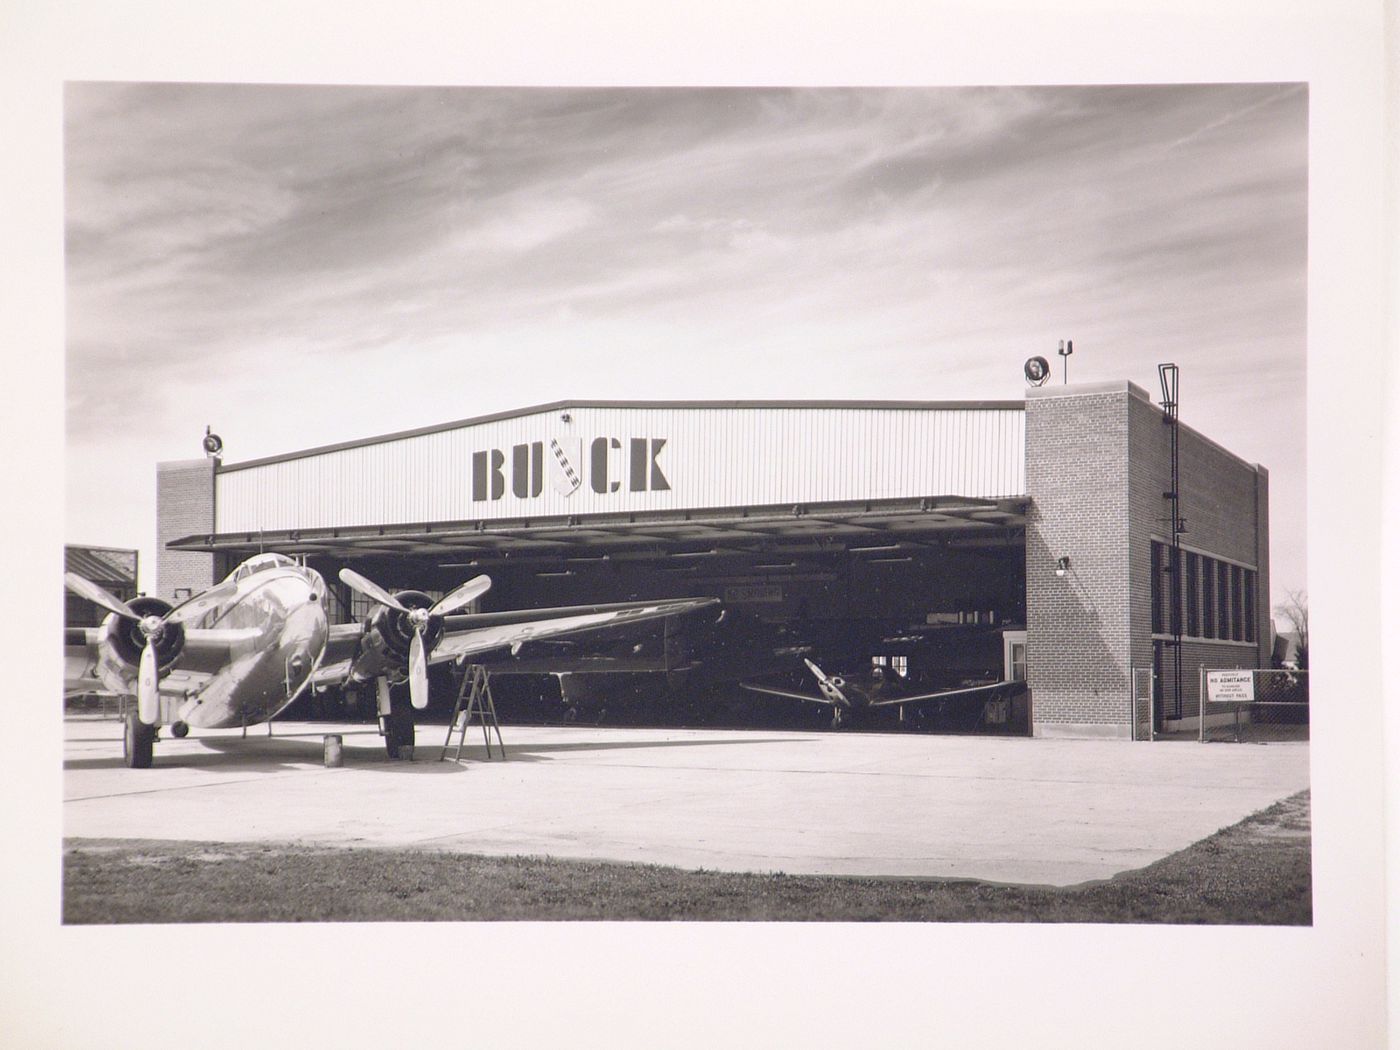 View of the principal façade of the Airplane Hangar of Bishop Airport, General Motors Corporation Buick division Airplane Assembly Plant, Flint, Michigan